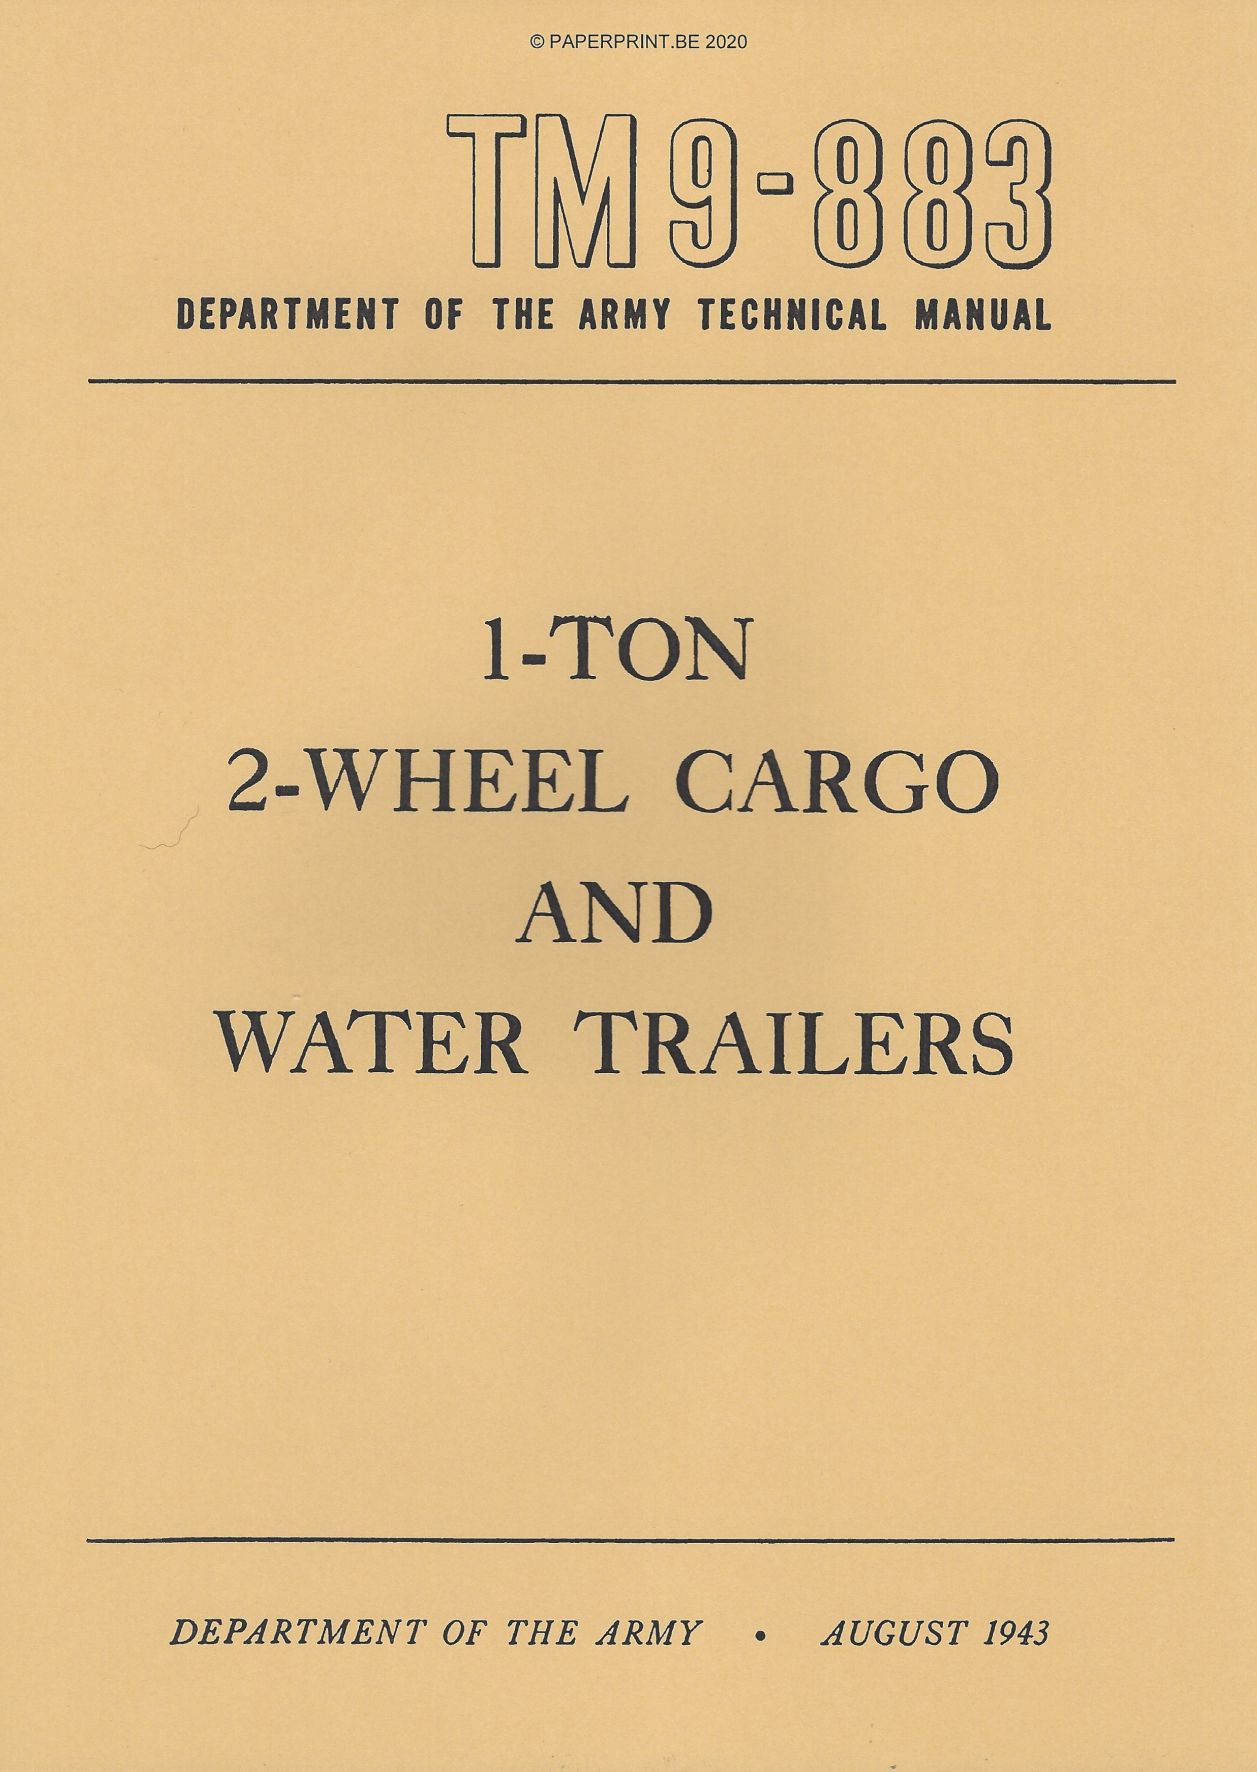 TM 9-883 US 1-TON 2-WHEEL CARGO AND WATER TRAILERS